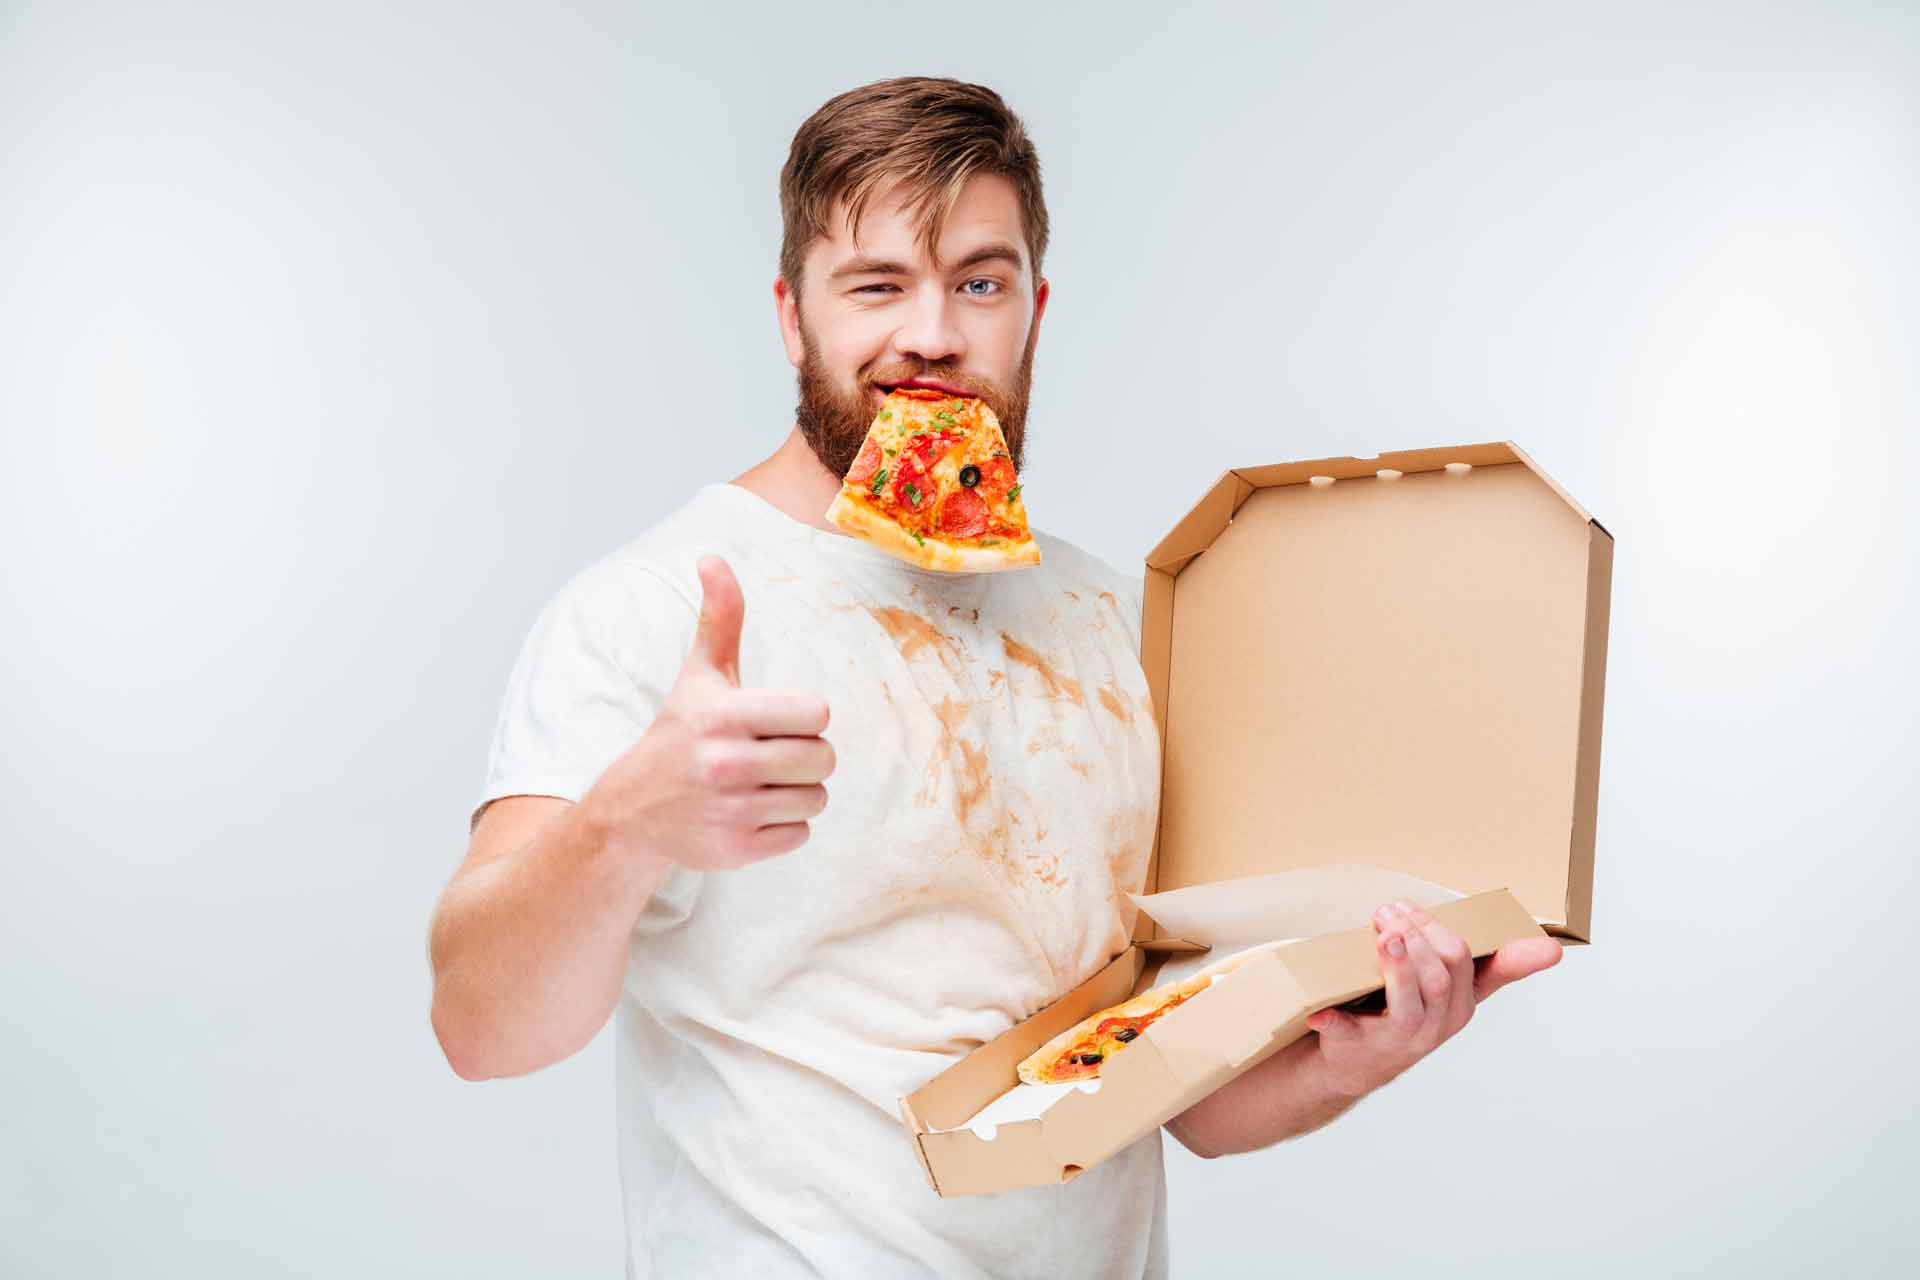 guy eating pizza giving thumbs up with a greasy shirt